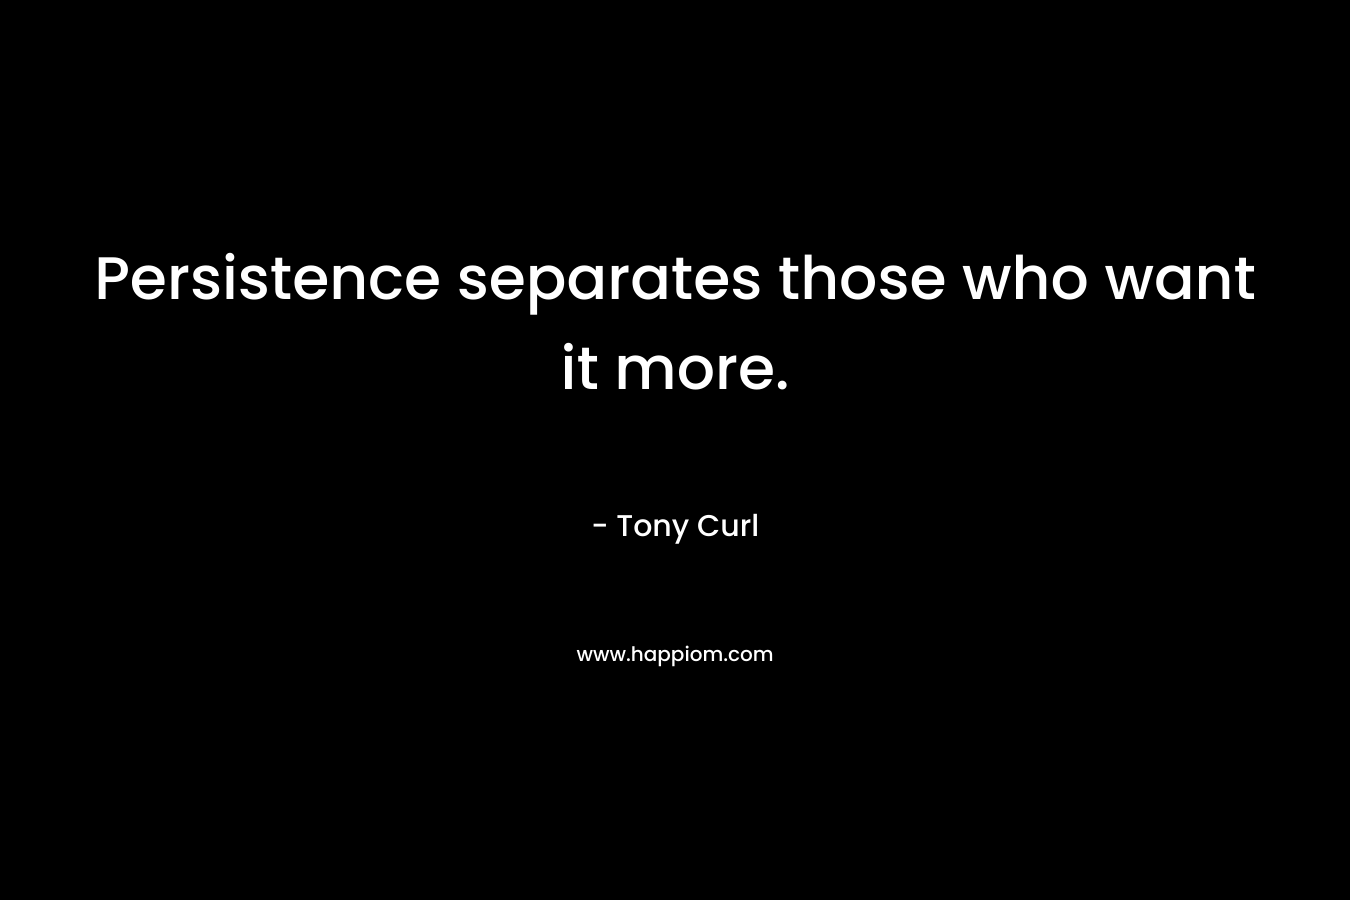 Persistence separates those who want it more.